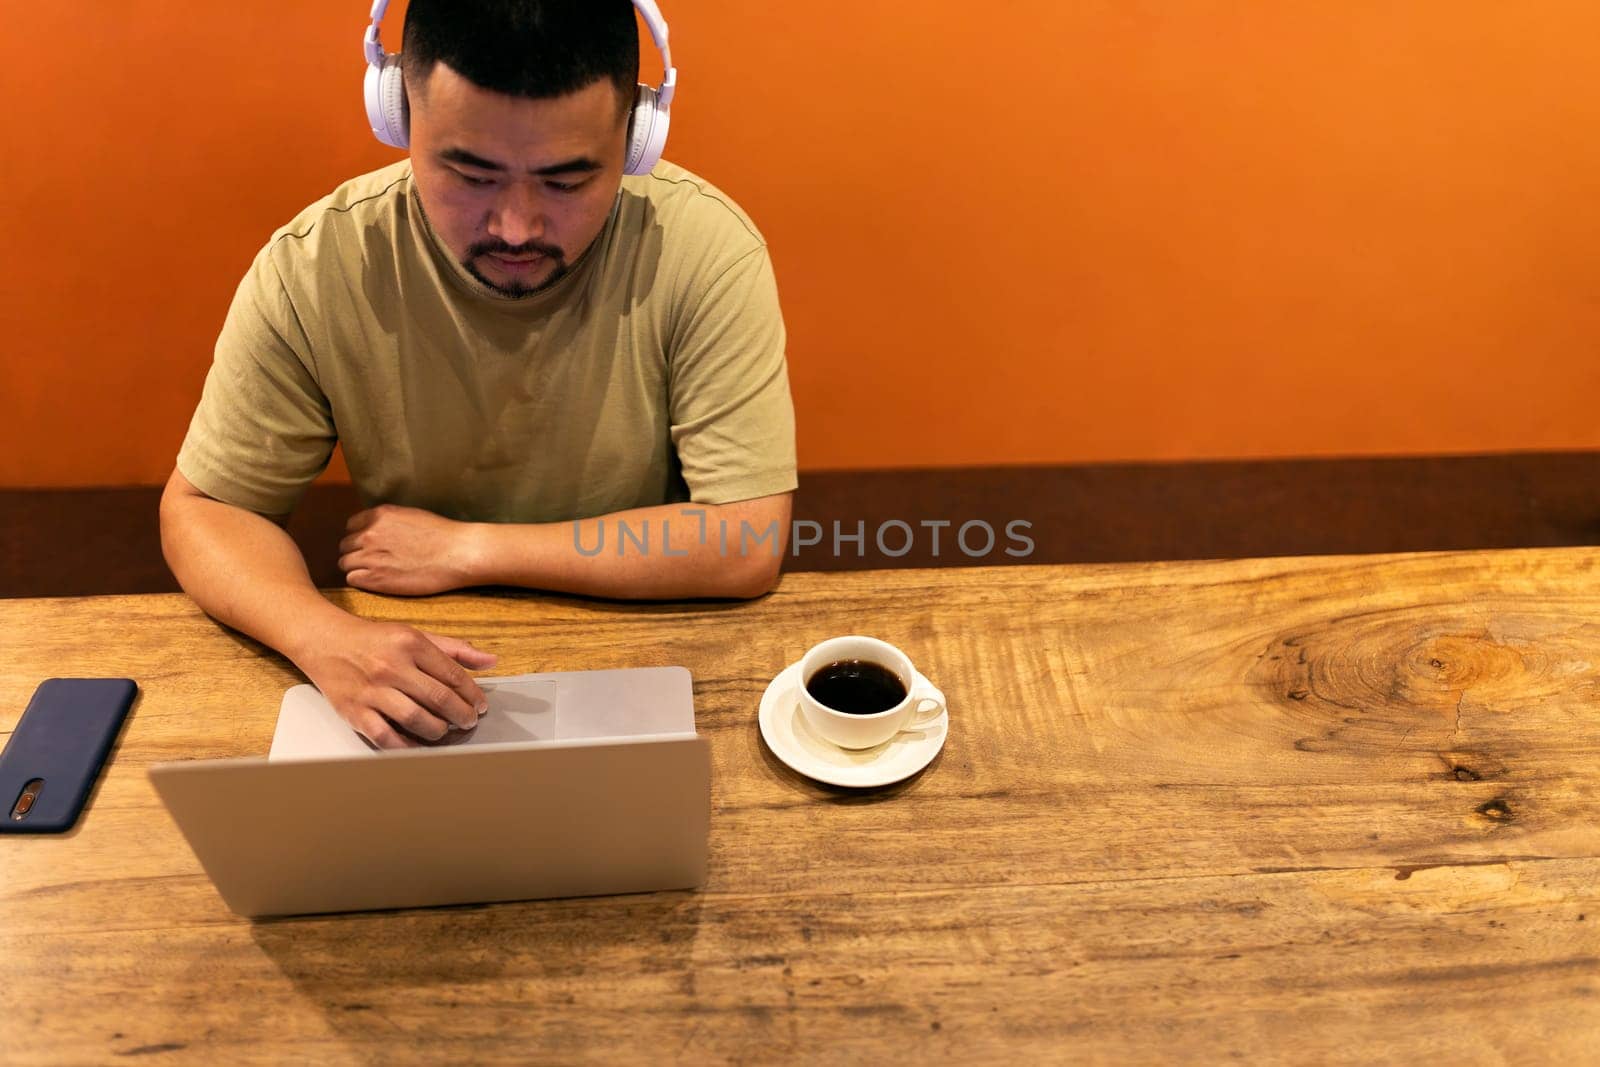 High angle view of Asian male freelance worker with headphones using laptop working in coffee shop. Copy space. Banner. Digital nomad concept.